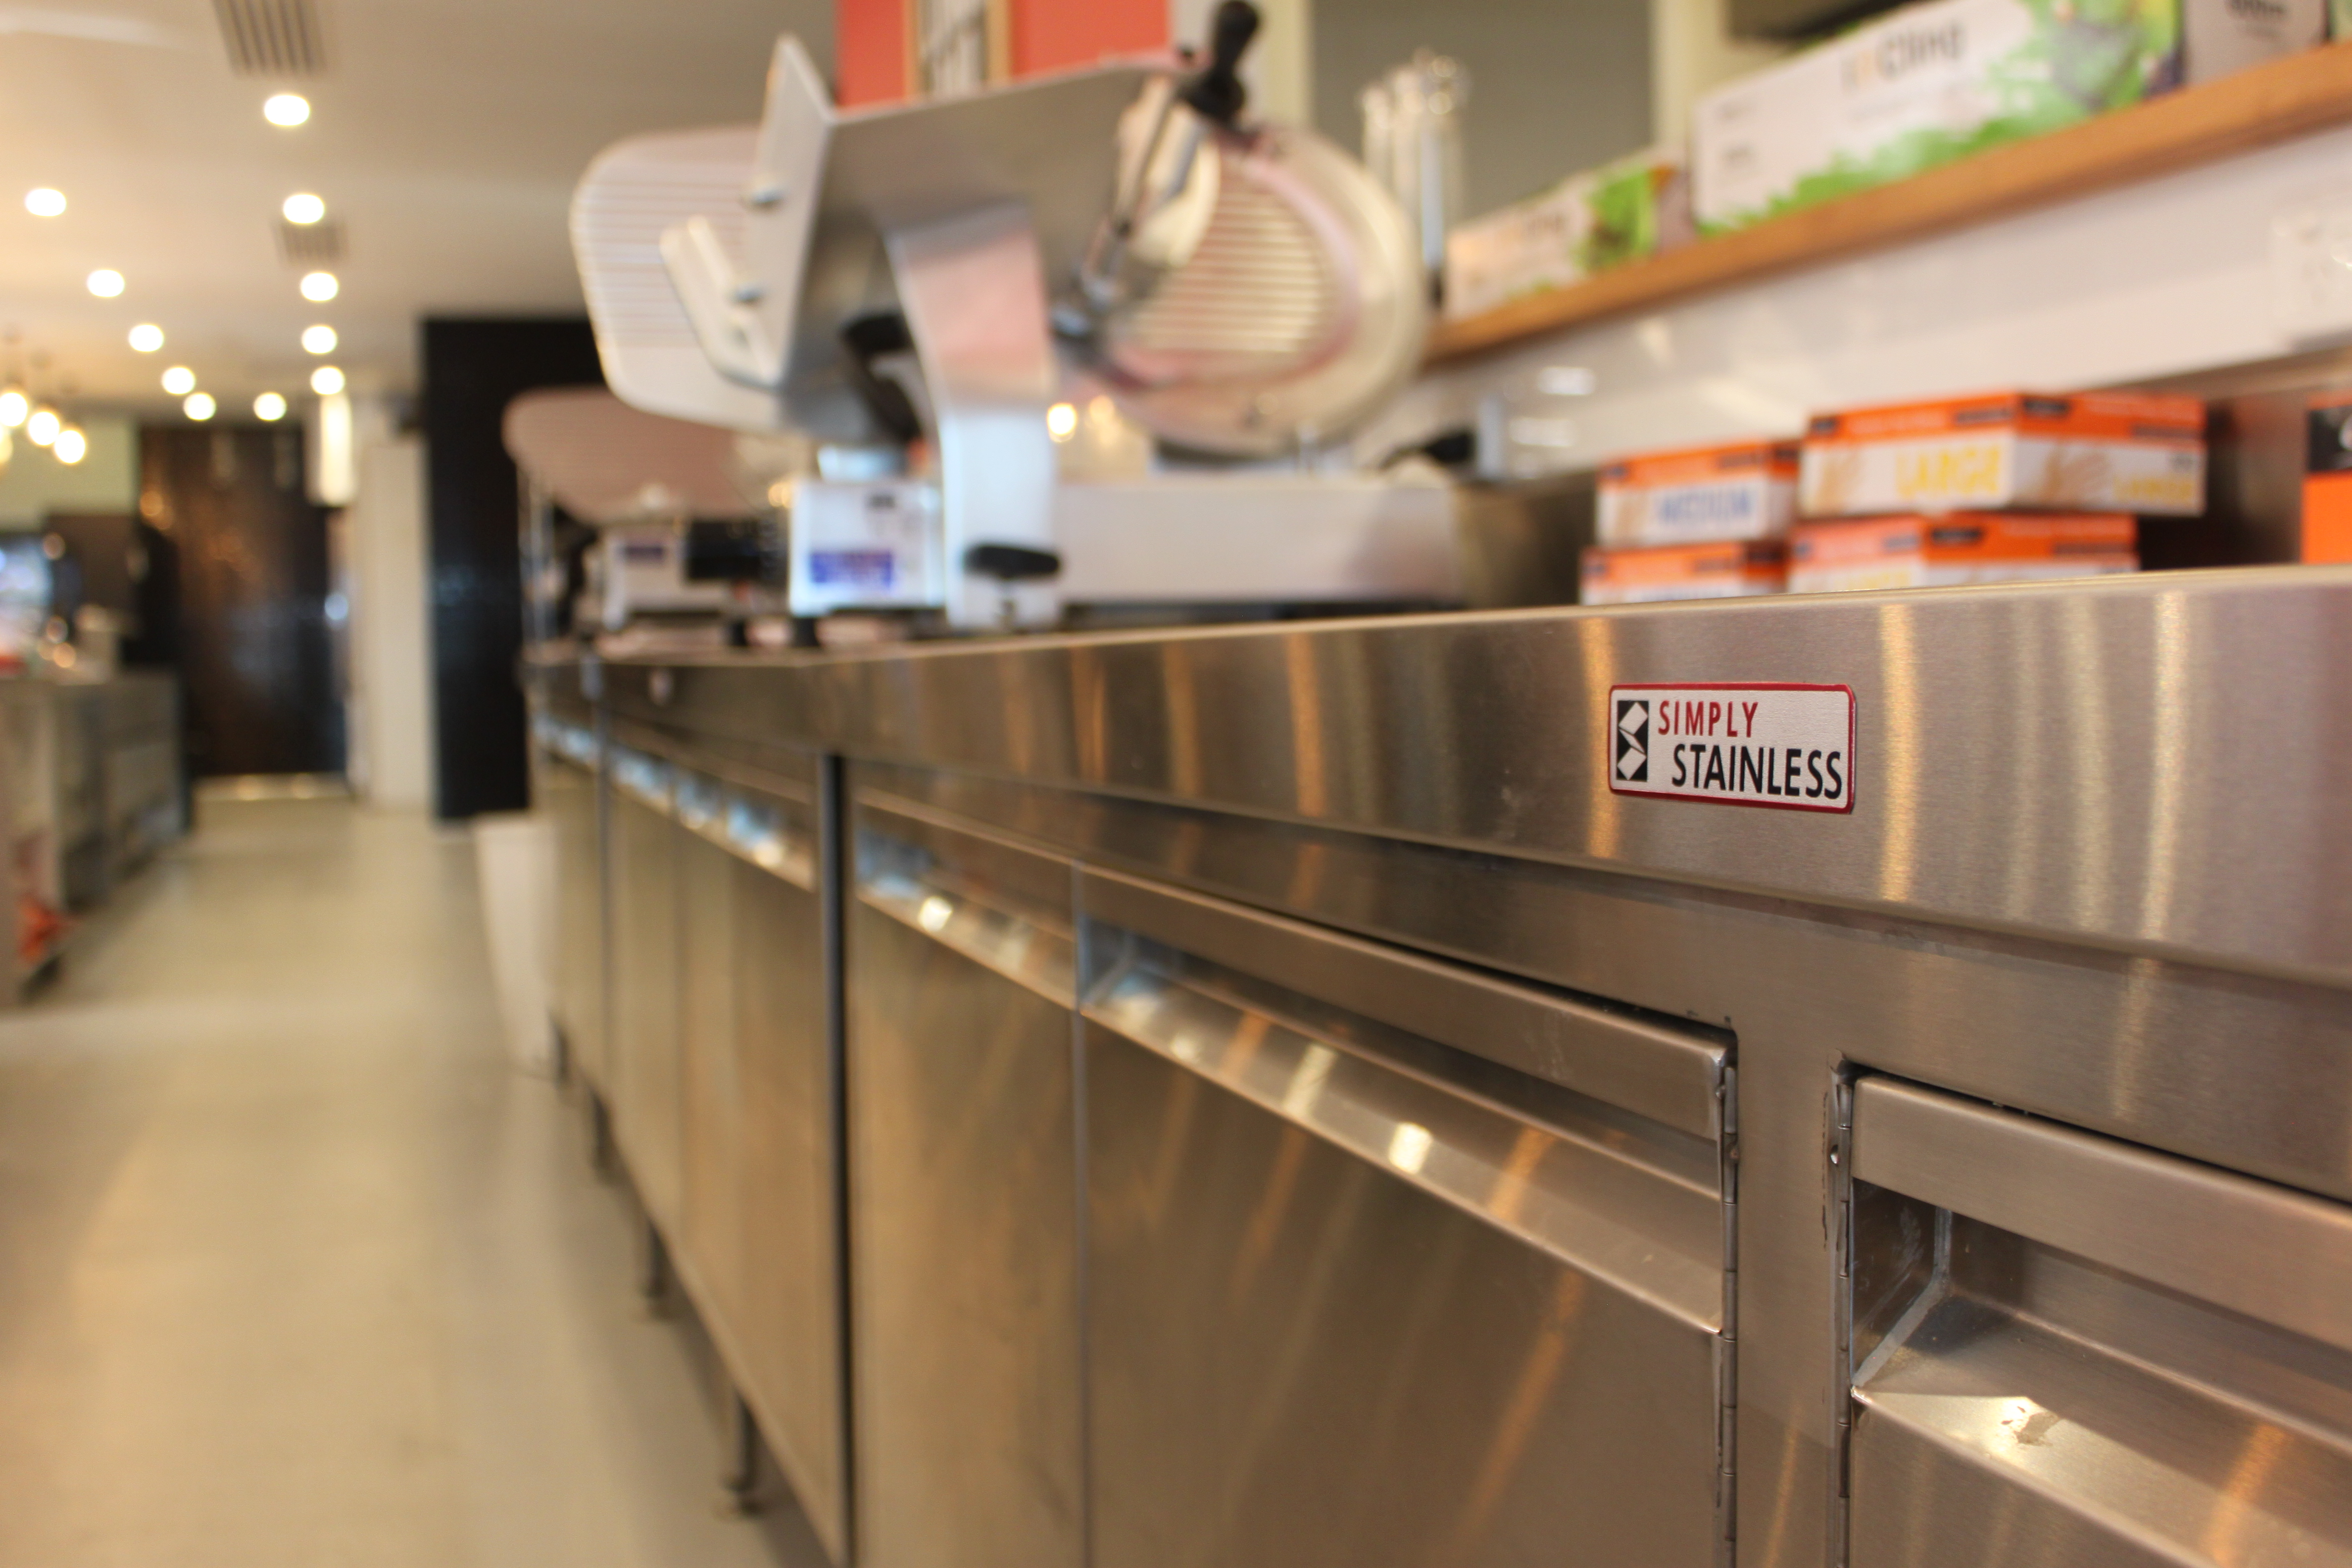 Simply Stainless stainless steel work tables at Deli Italia Restaurant